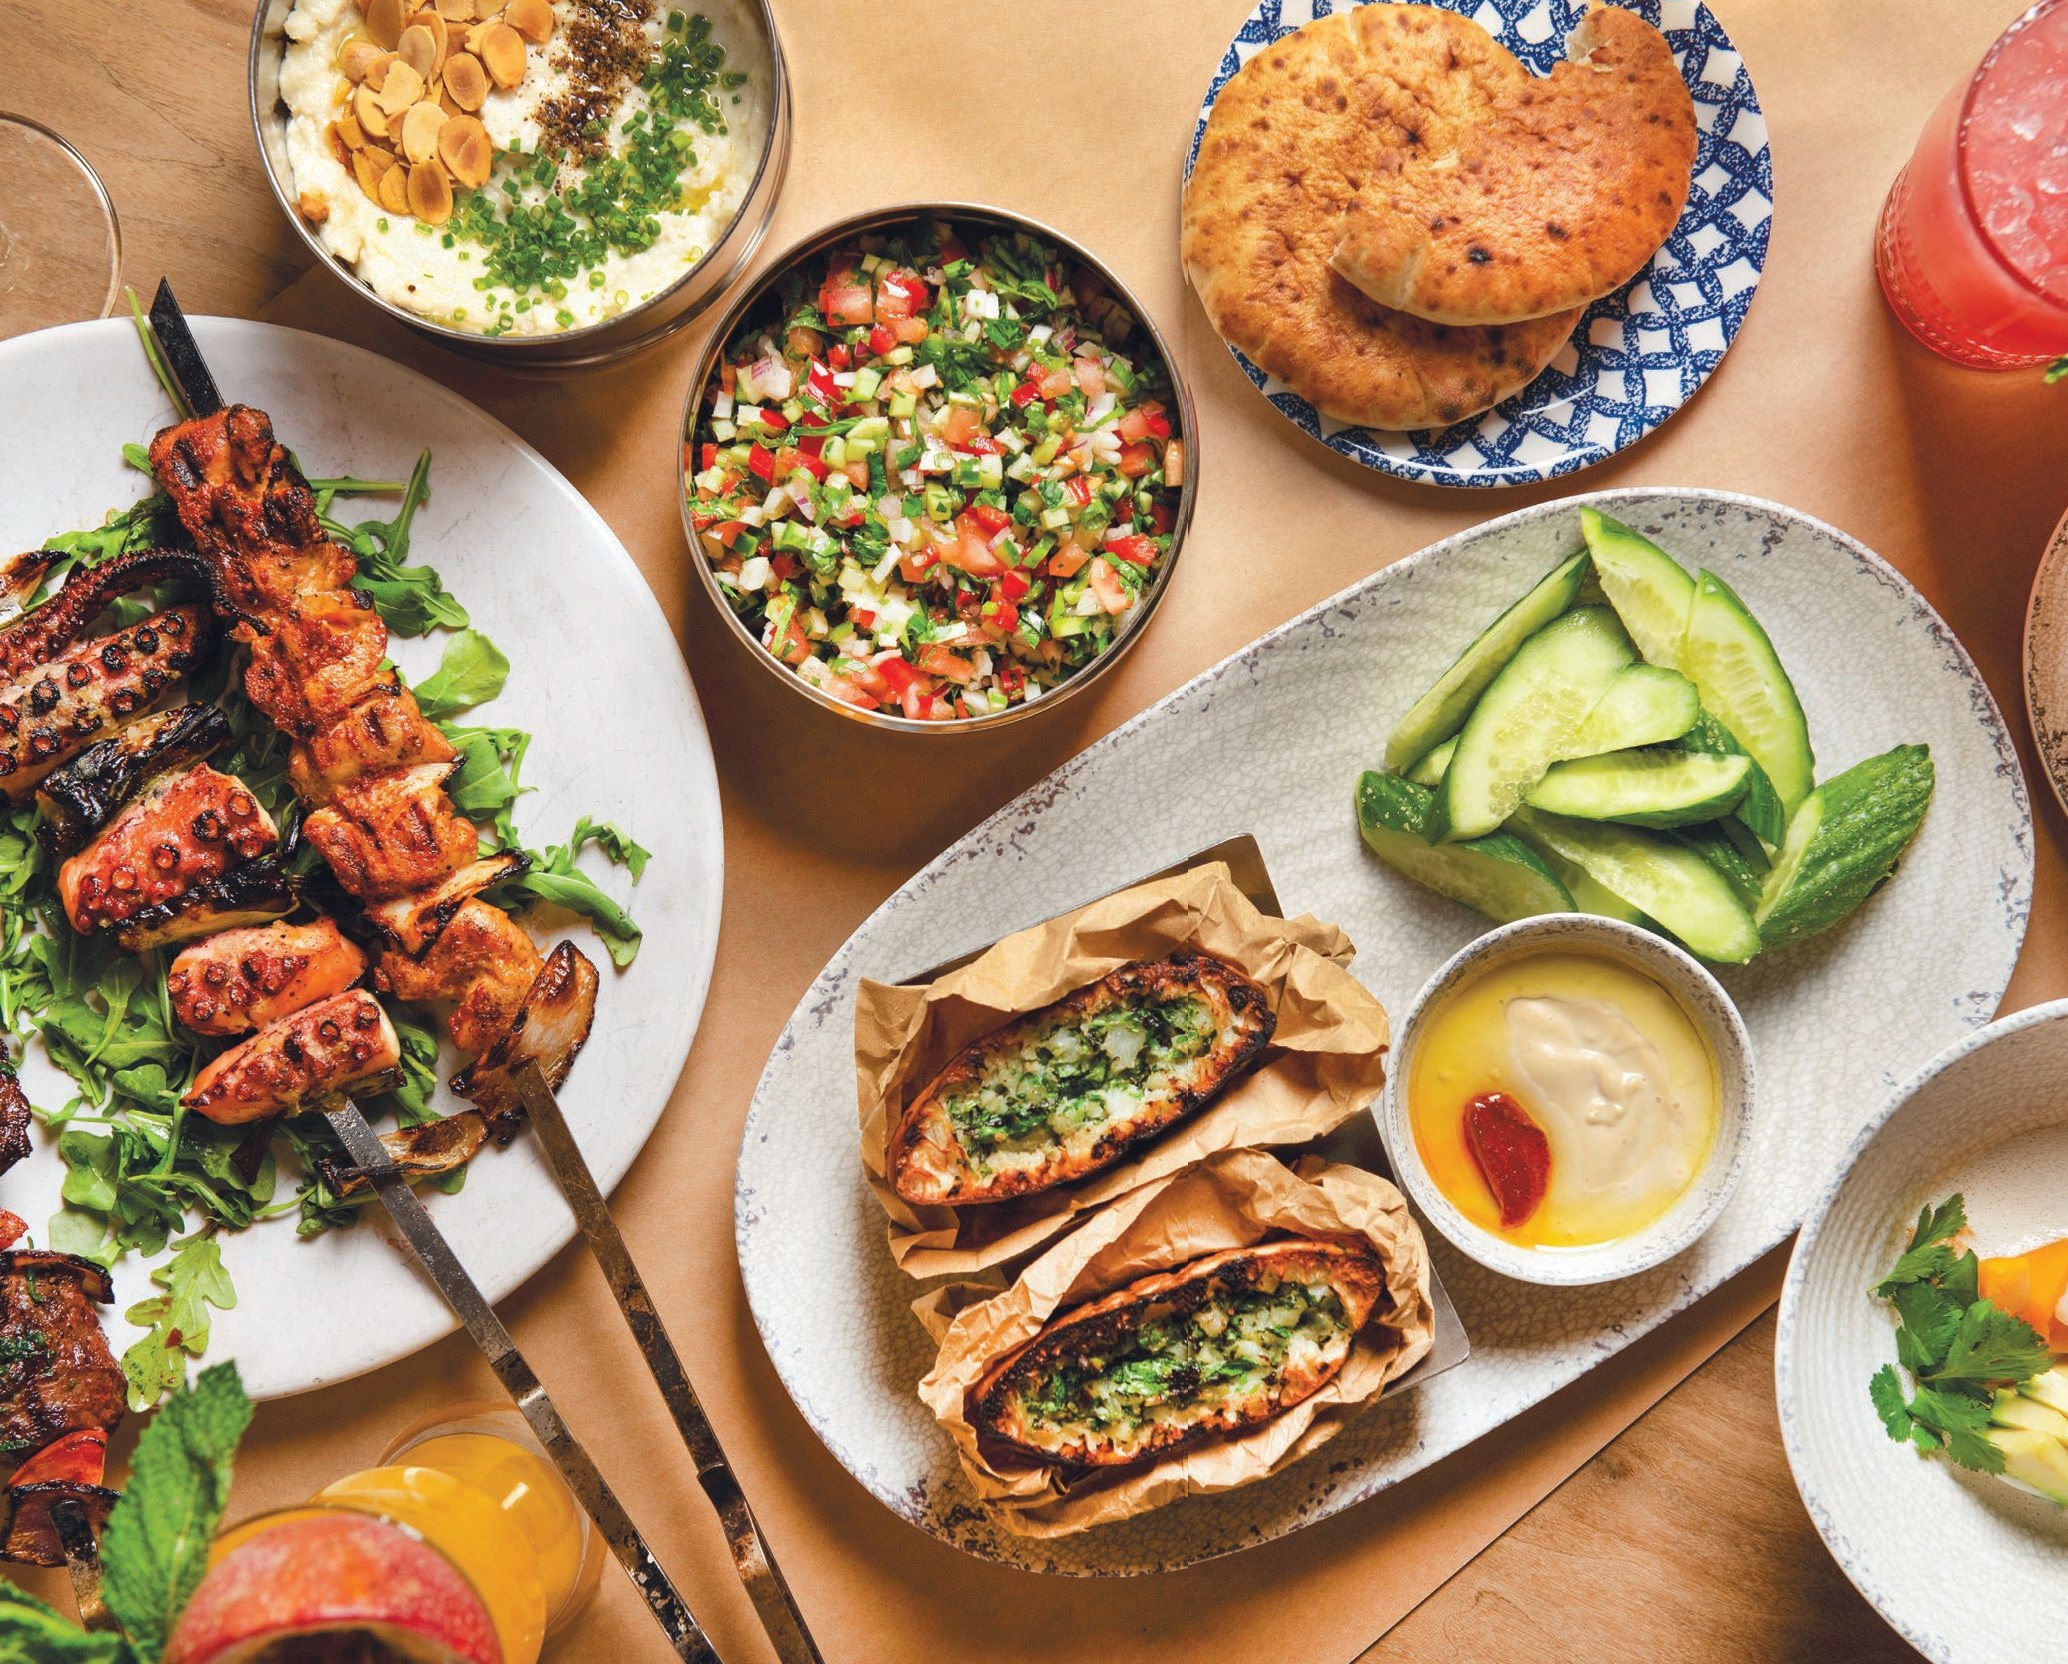 Mazeh’s vibrant Mediterranean dishes range from pitas to vegetables, skewers, dips and so much more. PHOTO BY LIZ CLAYMAN